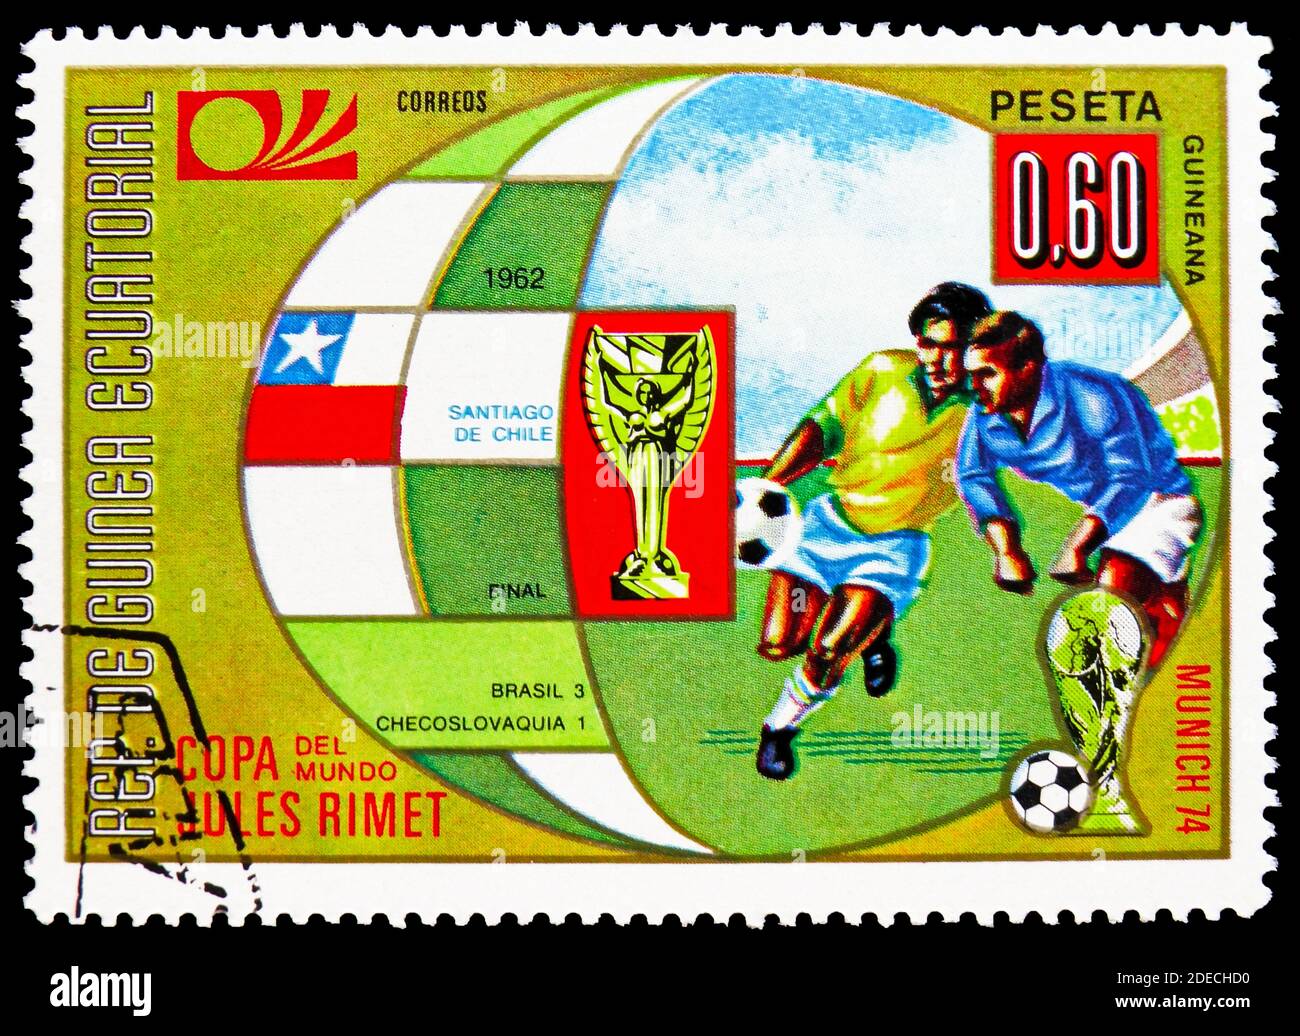 MOSCOW, RUSSIA - OCTOBER 17, 2020: Postage stamp printed in Equatorial Guinea shows Santiago de Chile, Football World Cup 1974, Germany: Earlier World Stock Photo